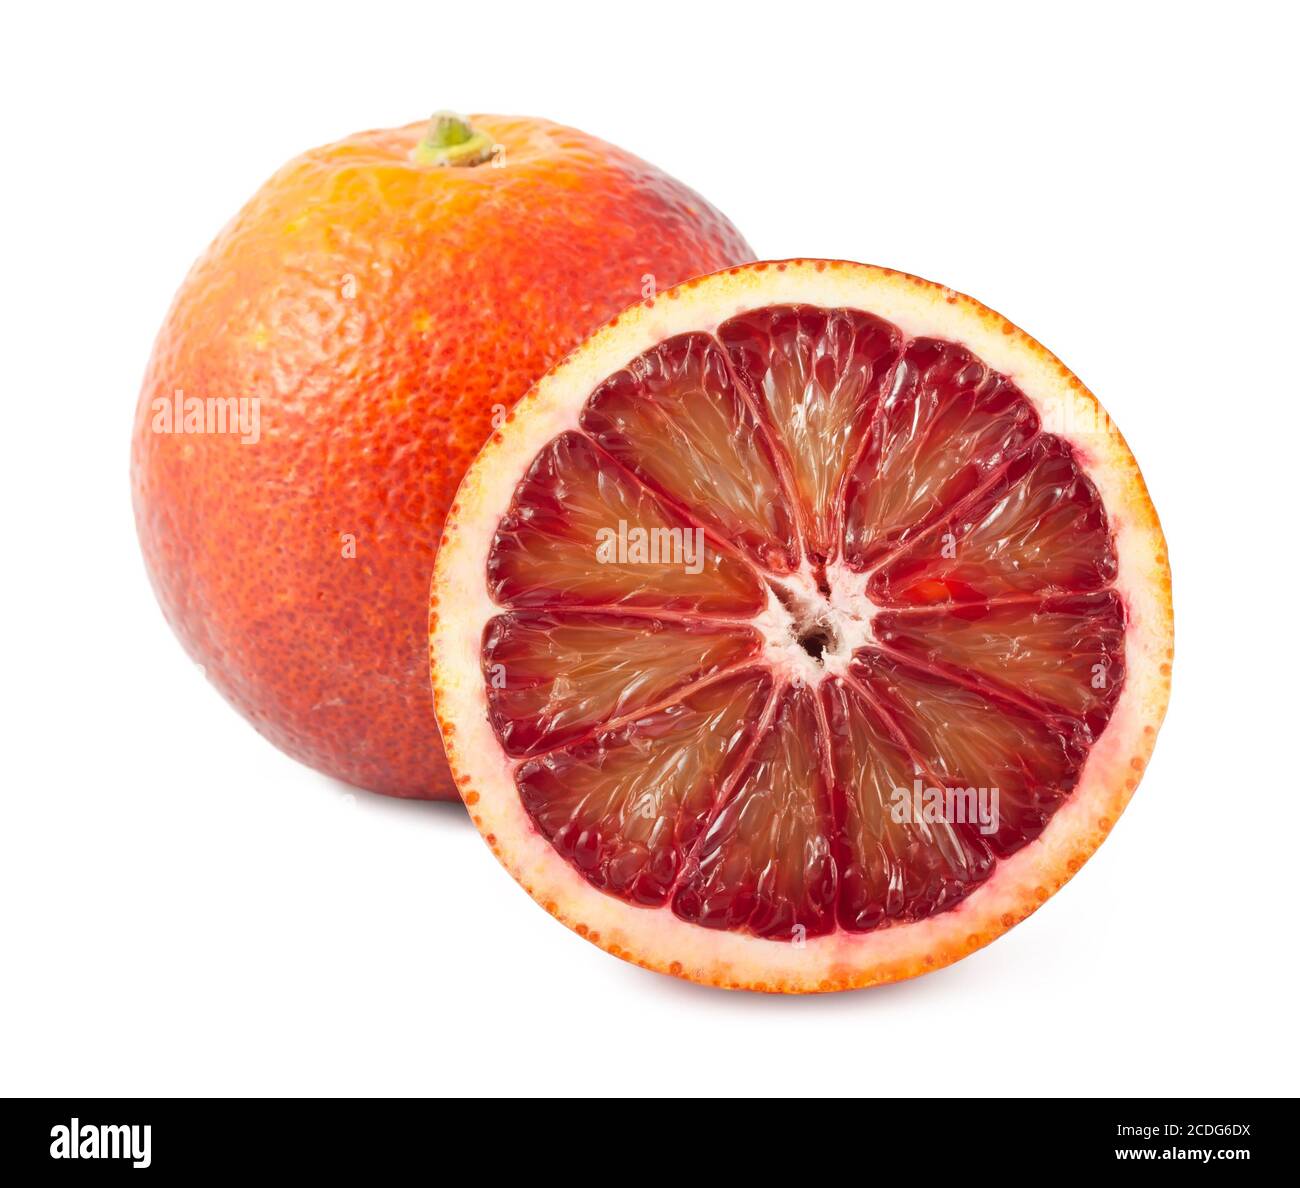 Full and half of blood red oranges Stock Photo